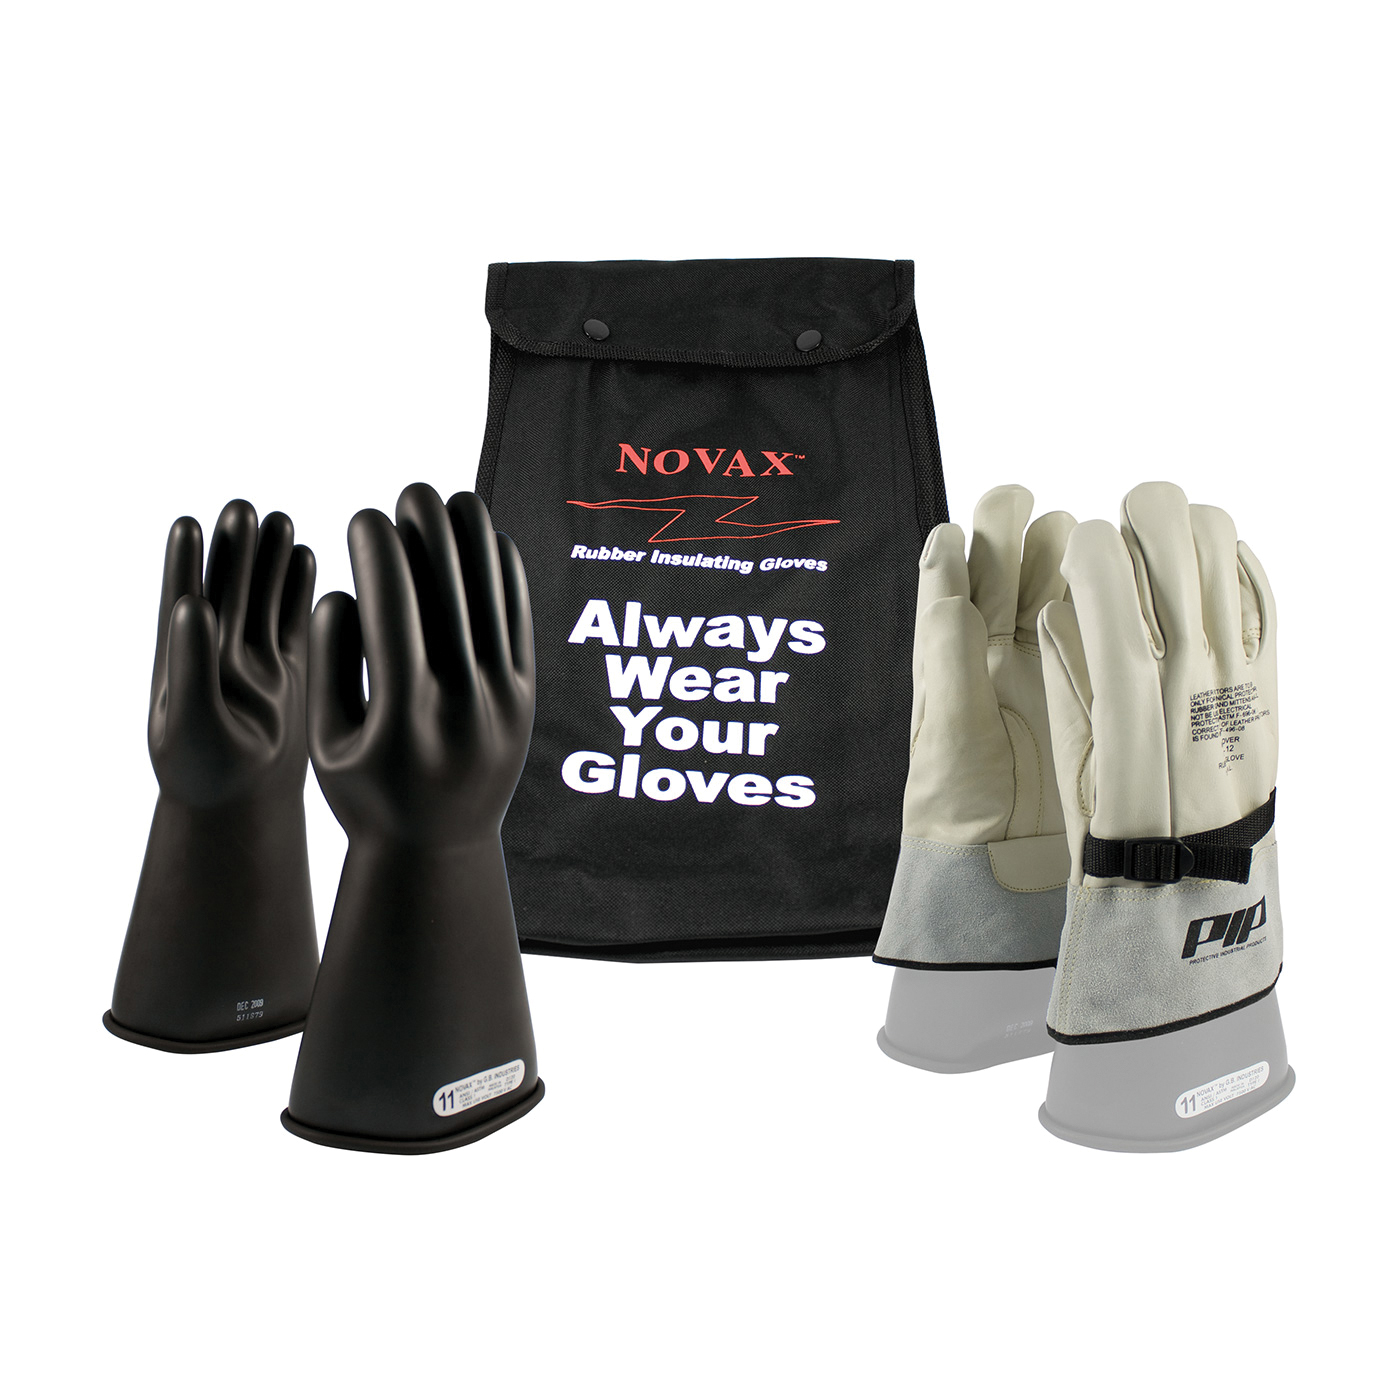 Novax® 150-SK-1/9-KIT Insulating Unisex Electrical Safety Gloves Kit, SZ 9, Cowhide Leather/Natural Rubber, Black/Natural, 14 in L, ASTM Class: Class 1, 7500 VAC, 11250 VDC Max Use Voltage